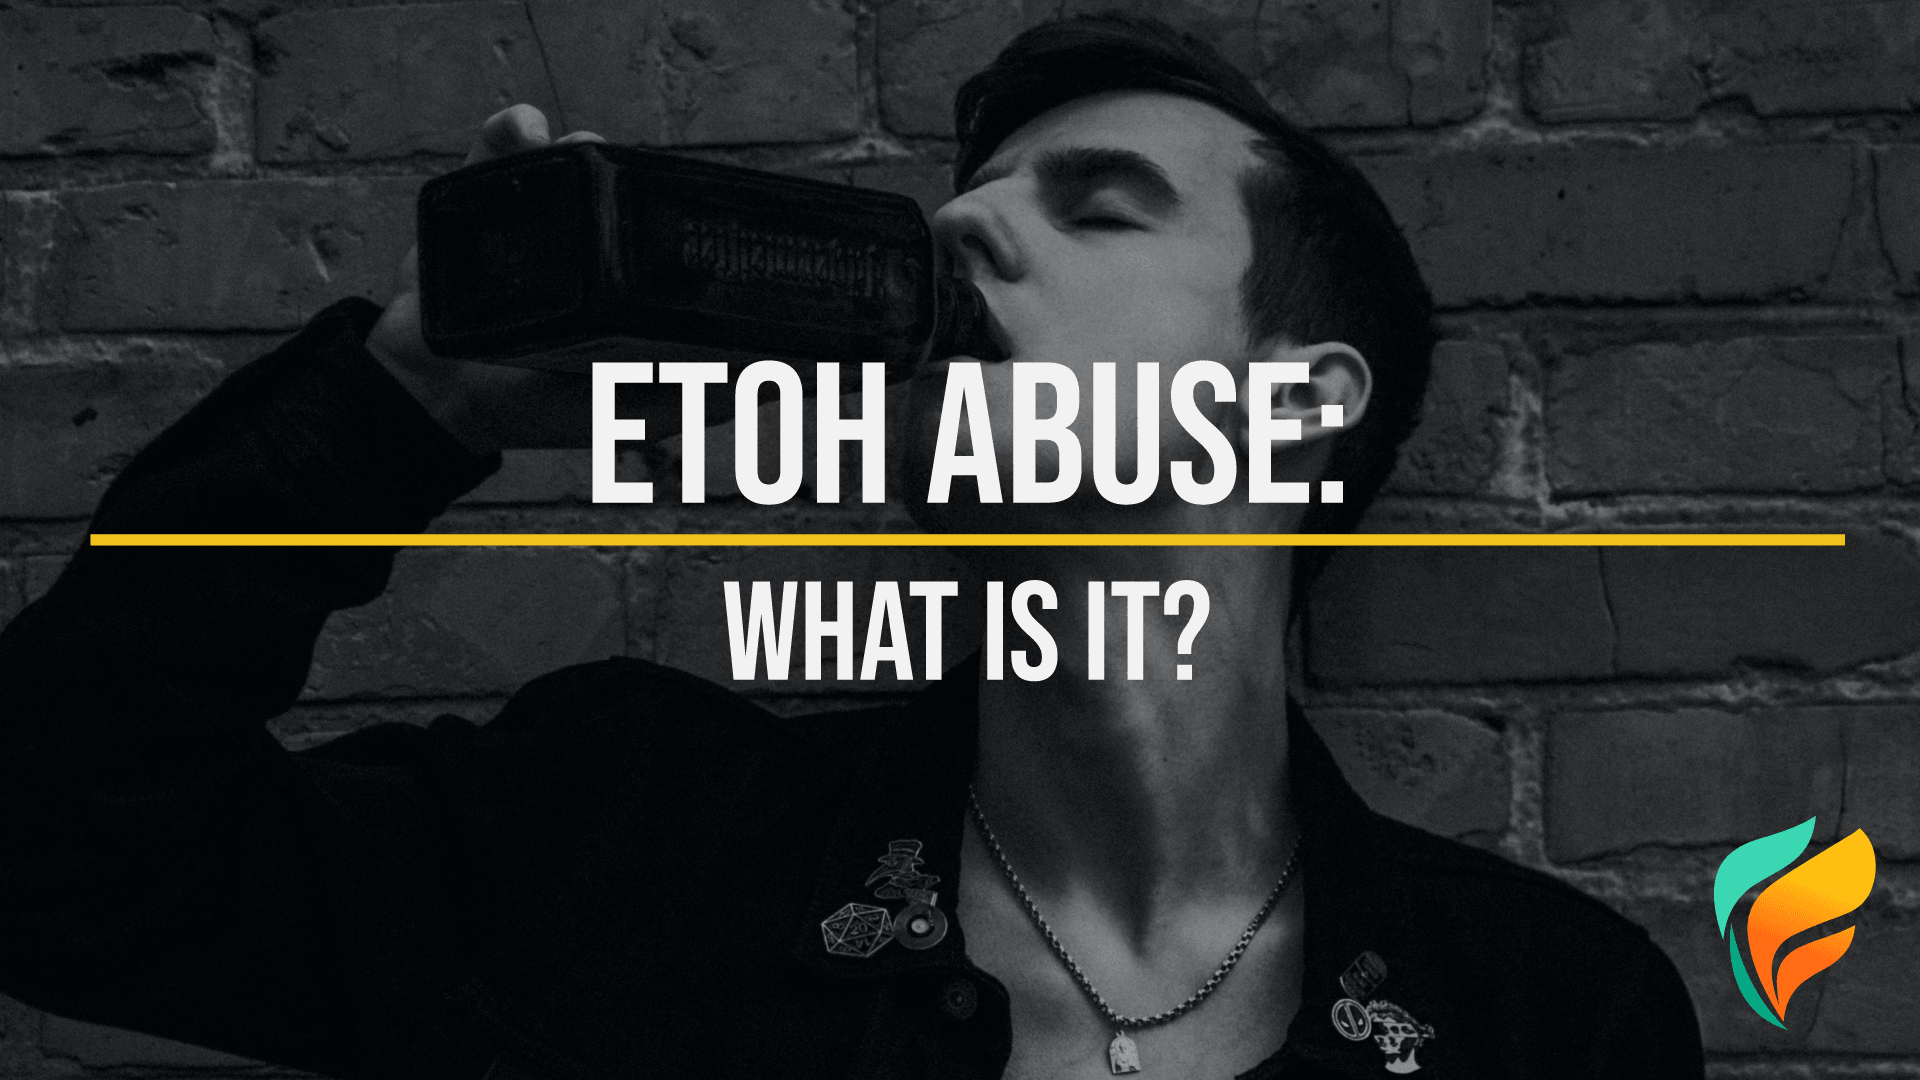 Facts About EtOH Abuse and More